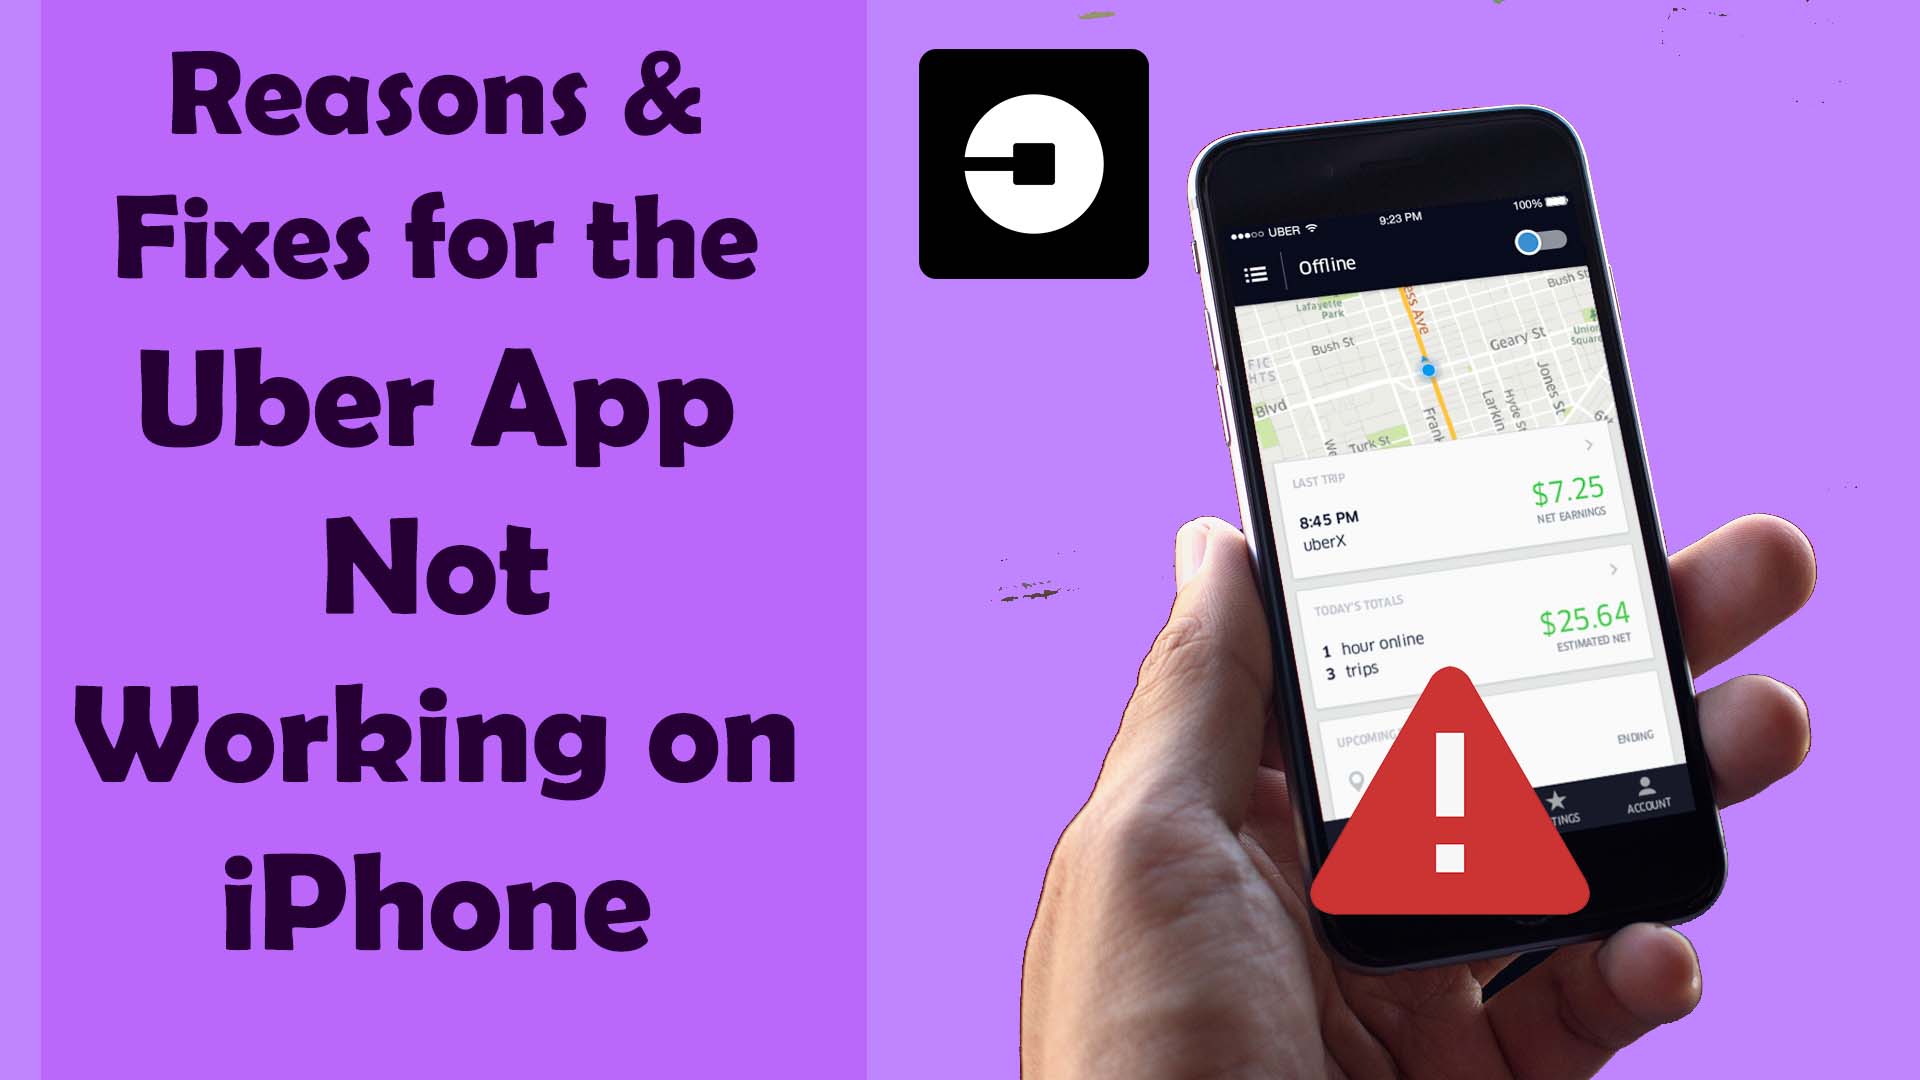 Uber App Not Working on iPhone: Reasons & Solutions!